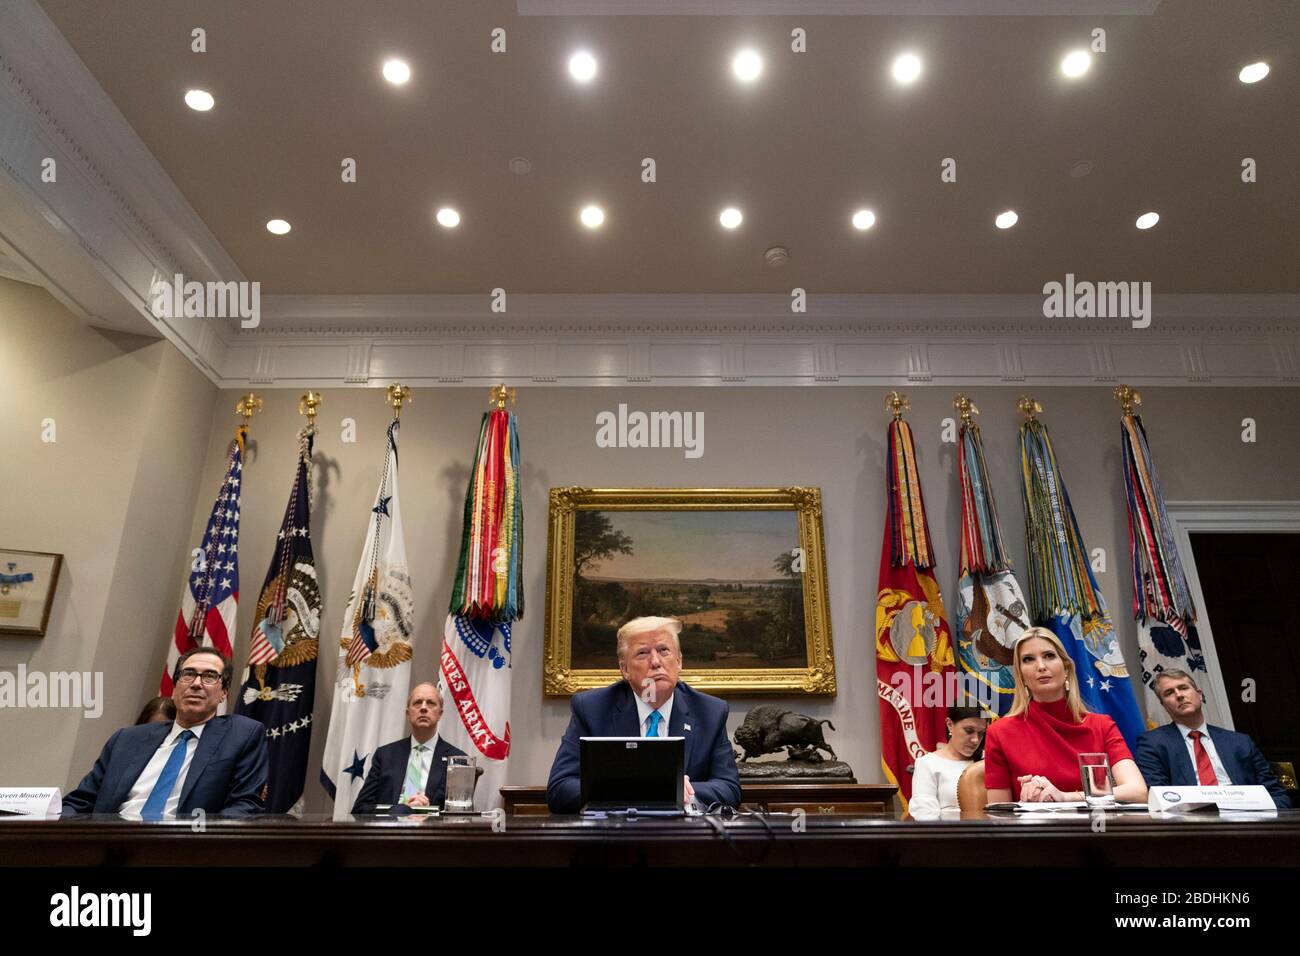 U.S. President Donald Trump, joined by Treasury Secretary Steven Mnuchin, presidential daughter Ivanka Trump, and Director of the National Economic Council Larry Kudlow, participates in a video conference with banking executives on small business relief  in the Roosevelt Room of the White House April 7, 2020 in Washington, DC. Stock Photo